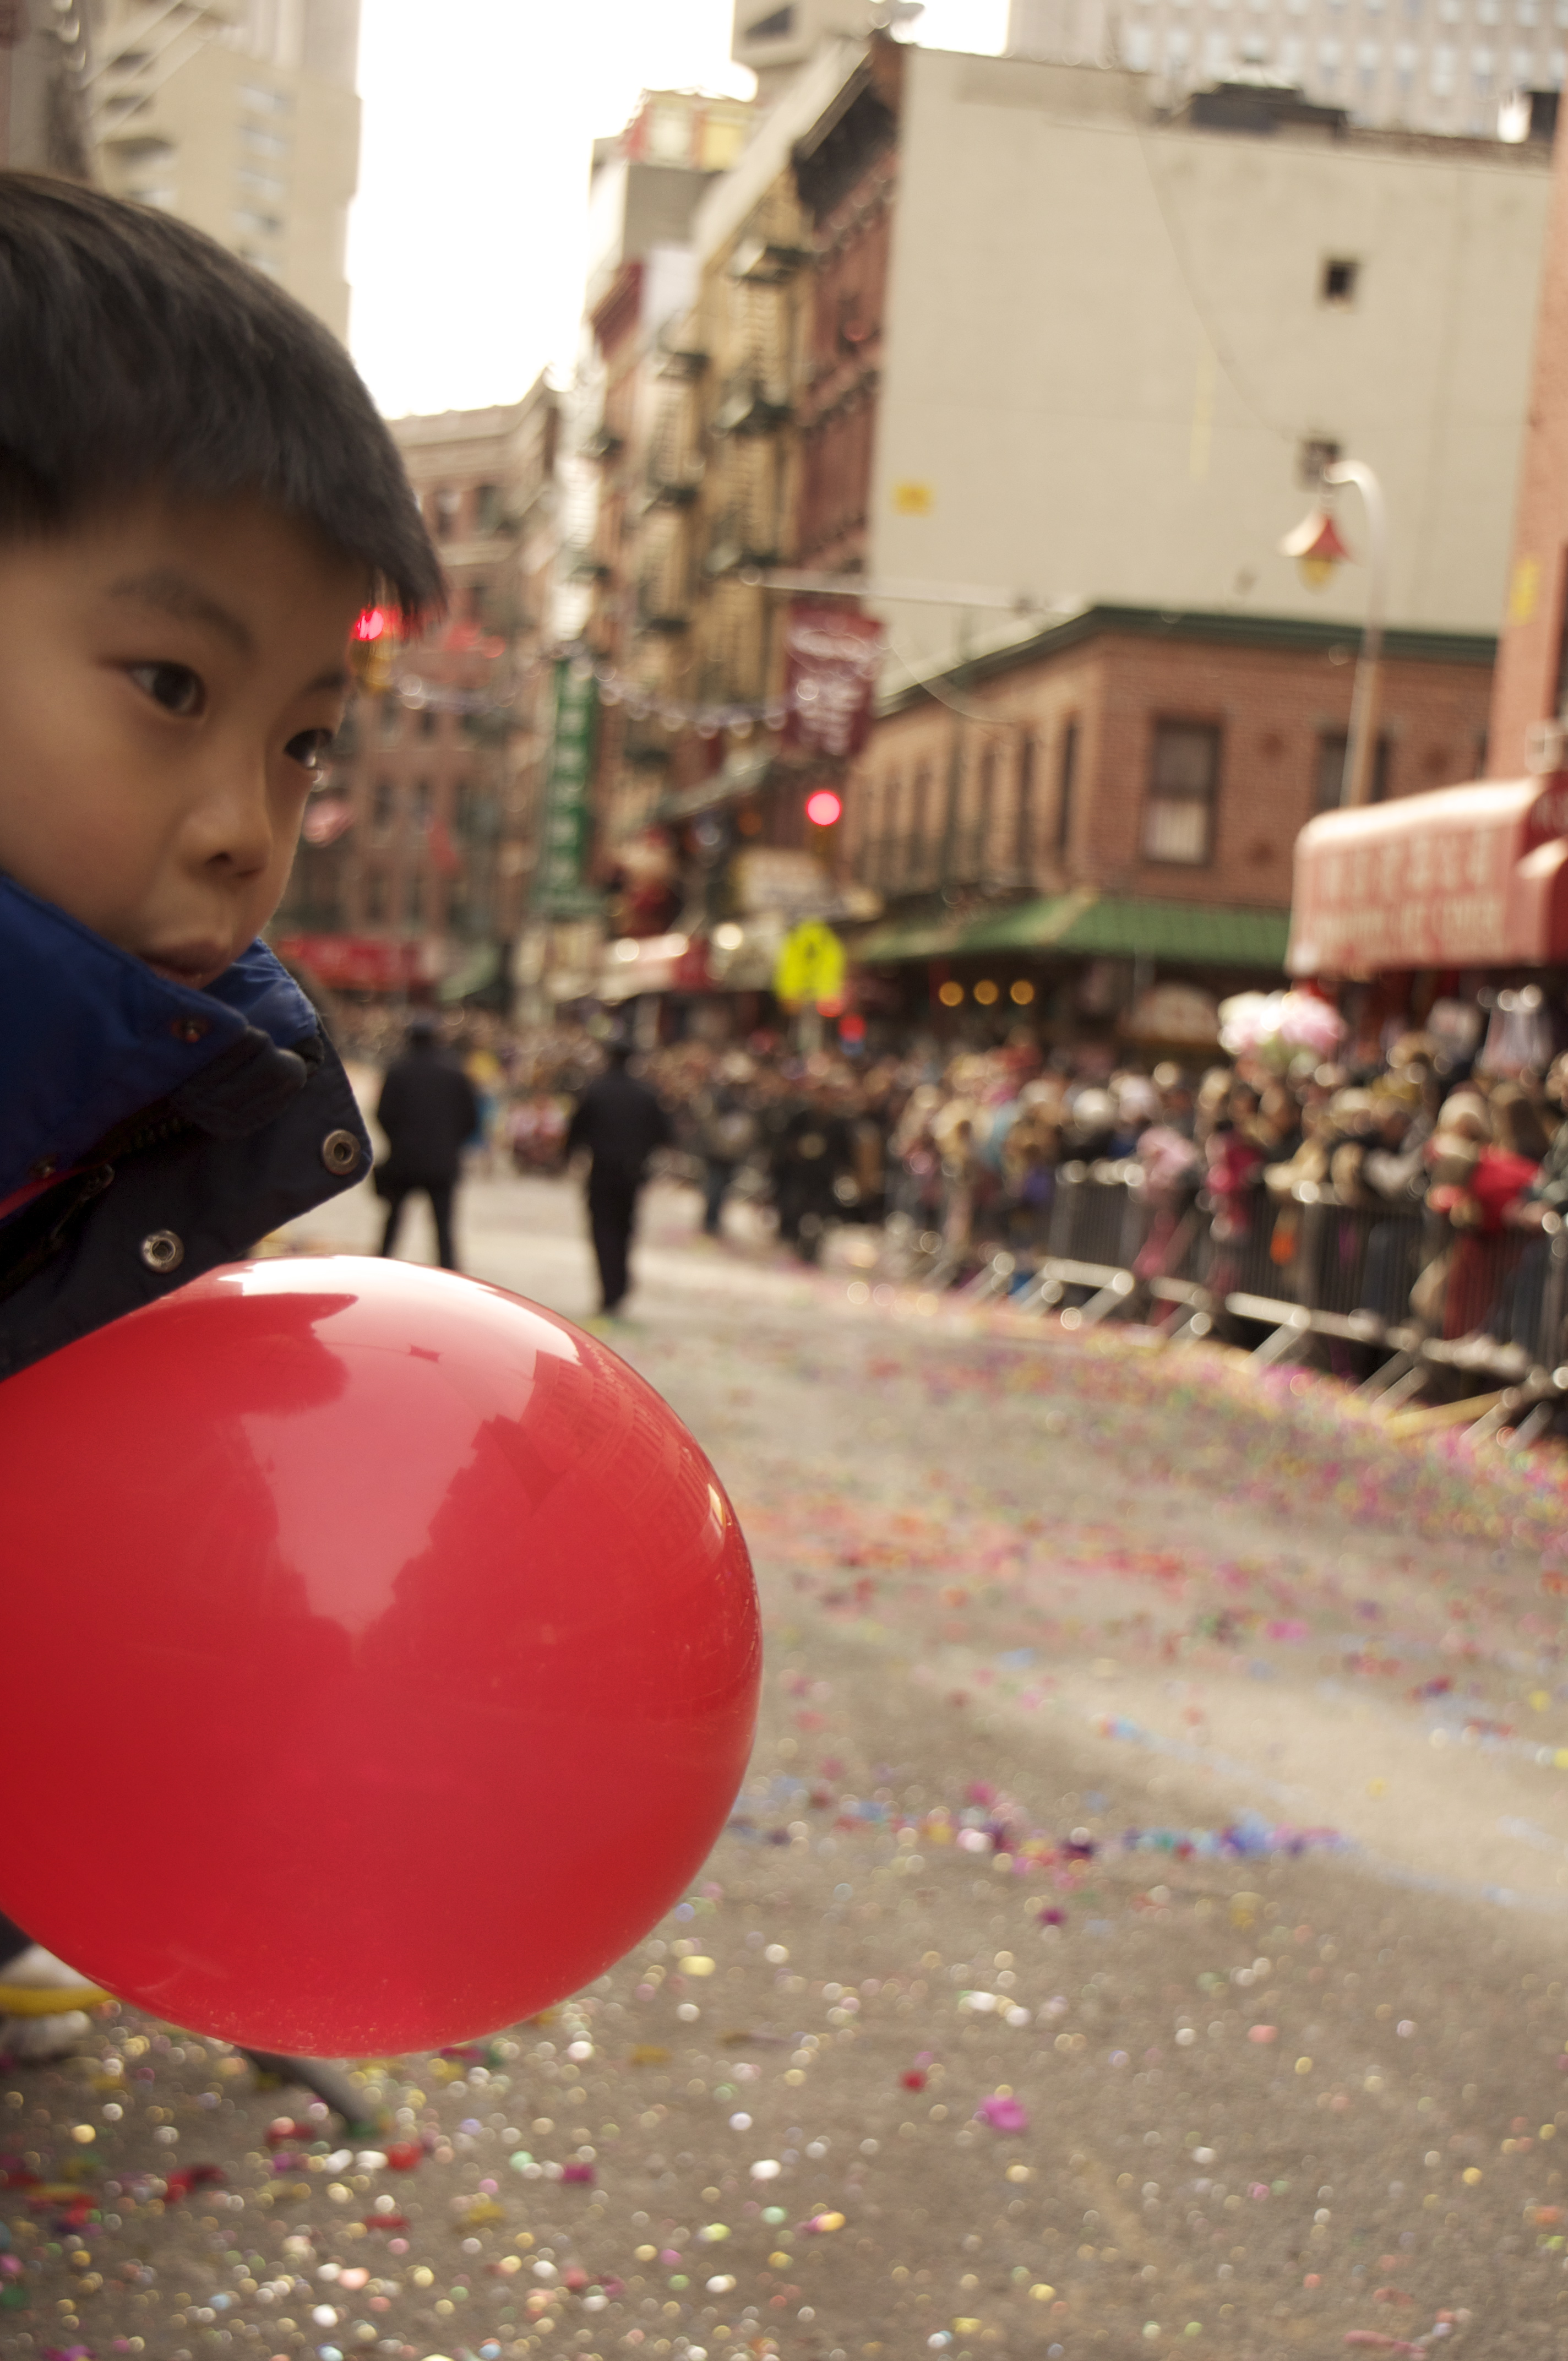 Staycation: Chinese New Year in NYC